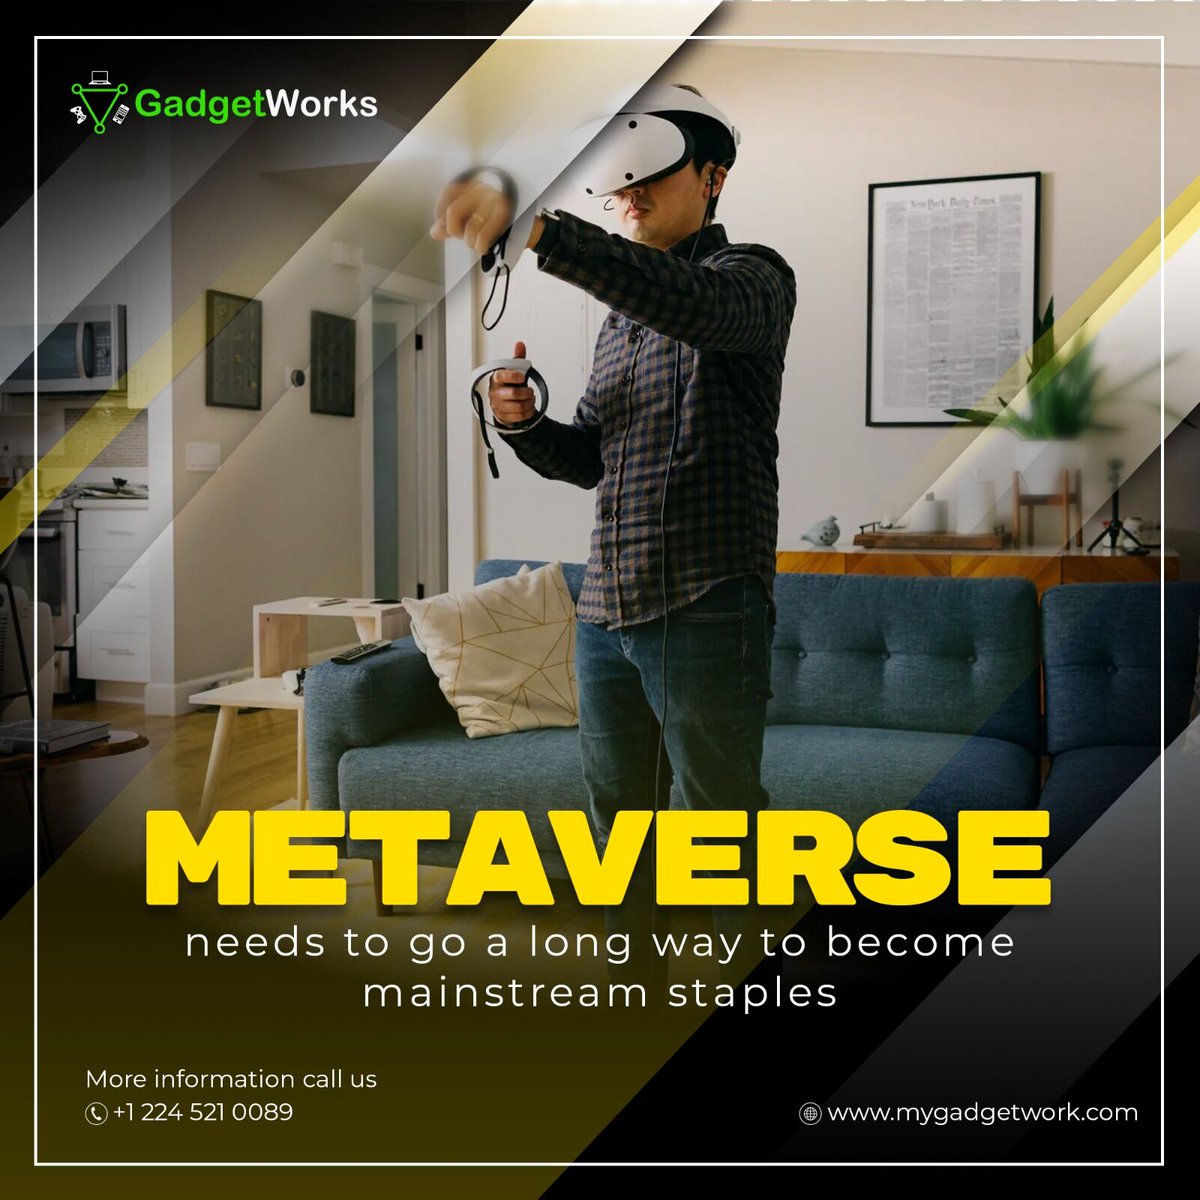 The virtual reality game is on high nowadays. But in comparison to that, Metaverse needs to work a long way to be on the traction. 

Visit Our Website or Visit Our Store : mygadgetworks.com

#metaverse #realitygame #videogamers #repairservices #gadgetissues #devicerepair